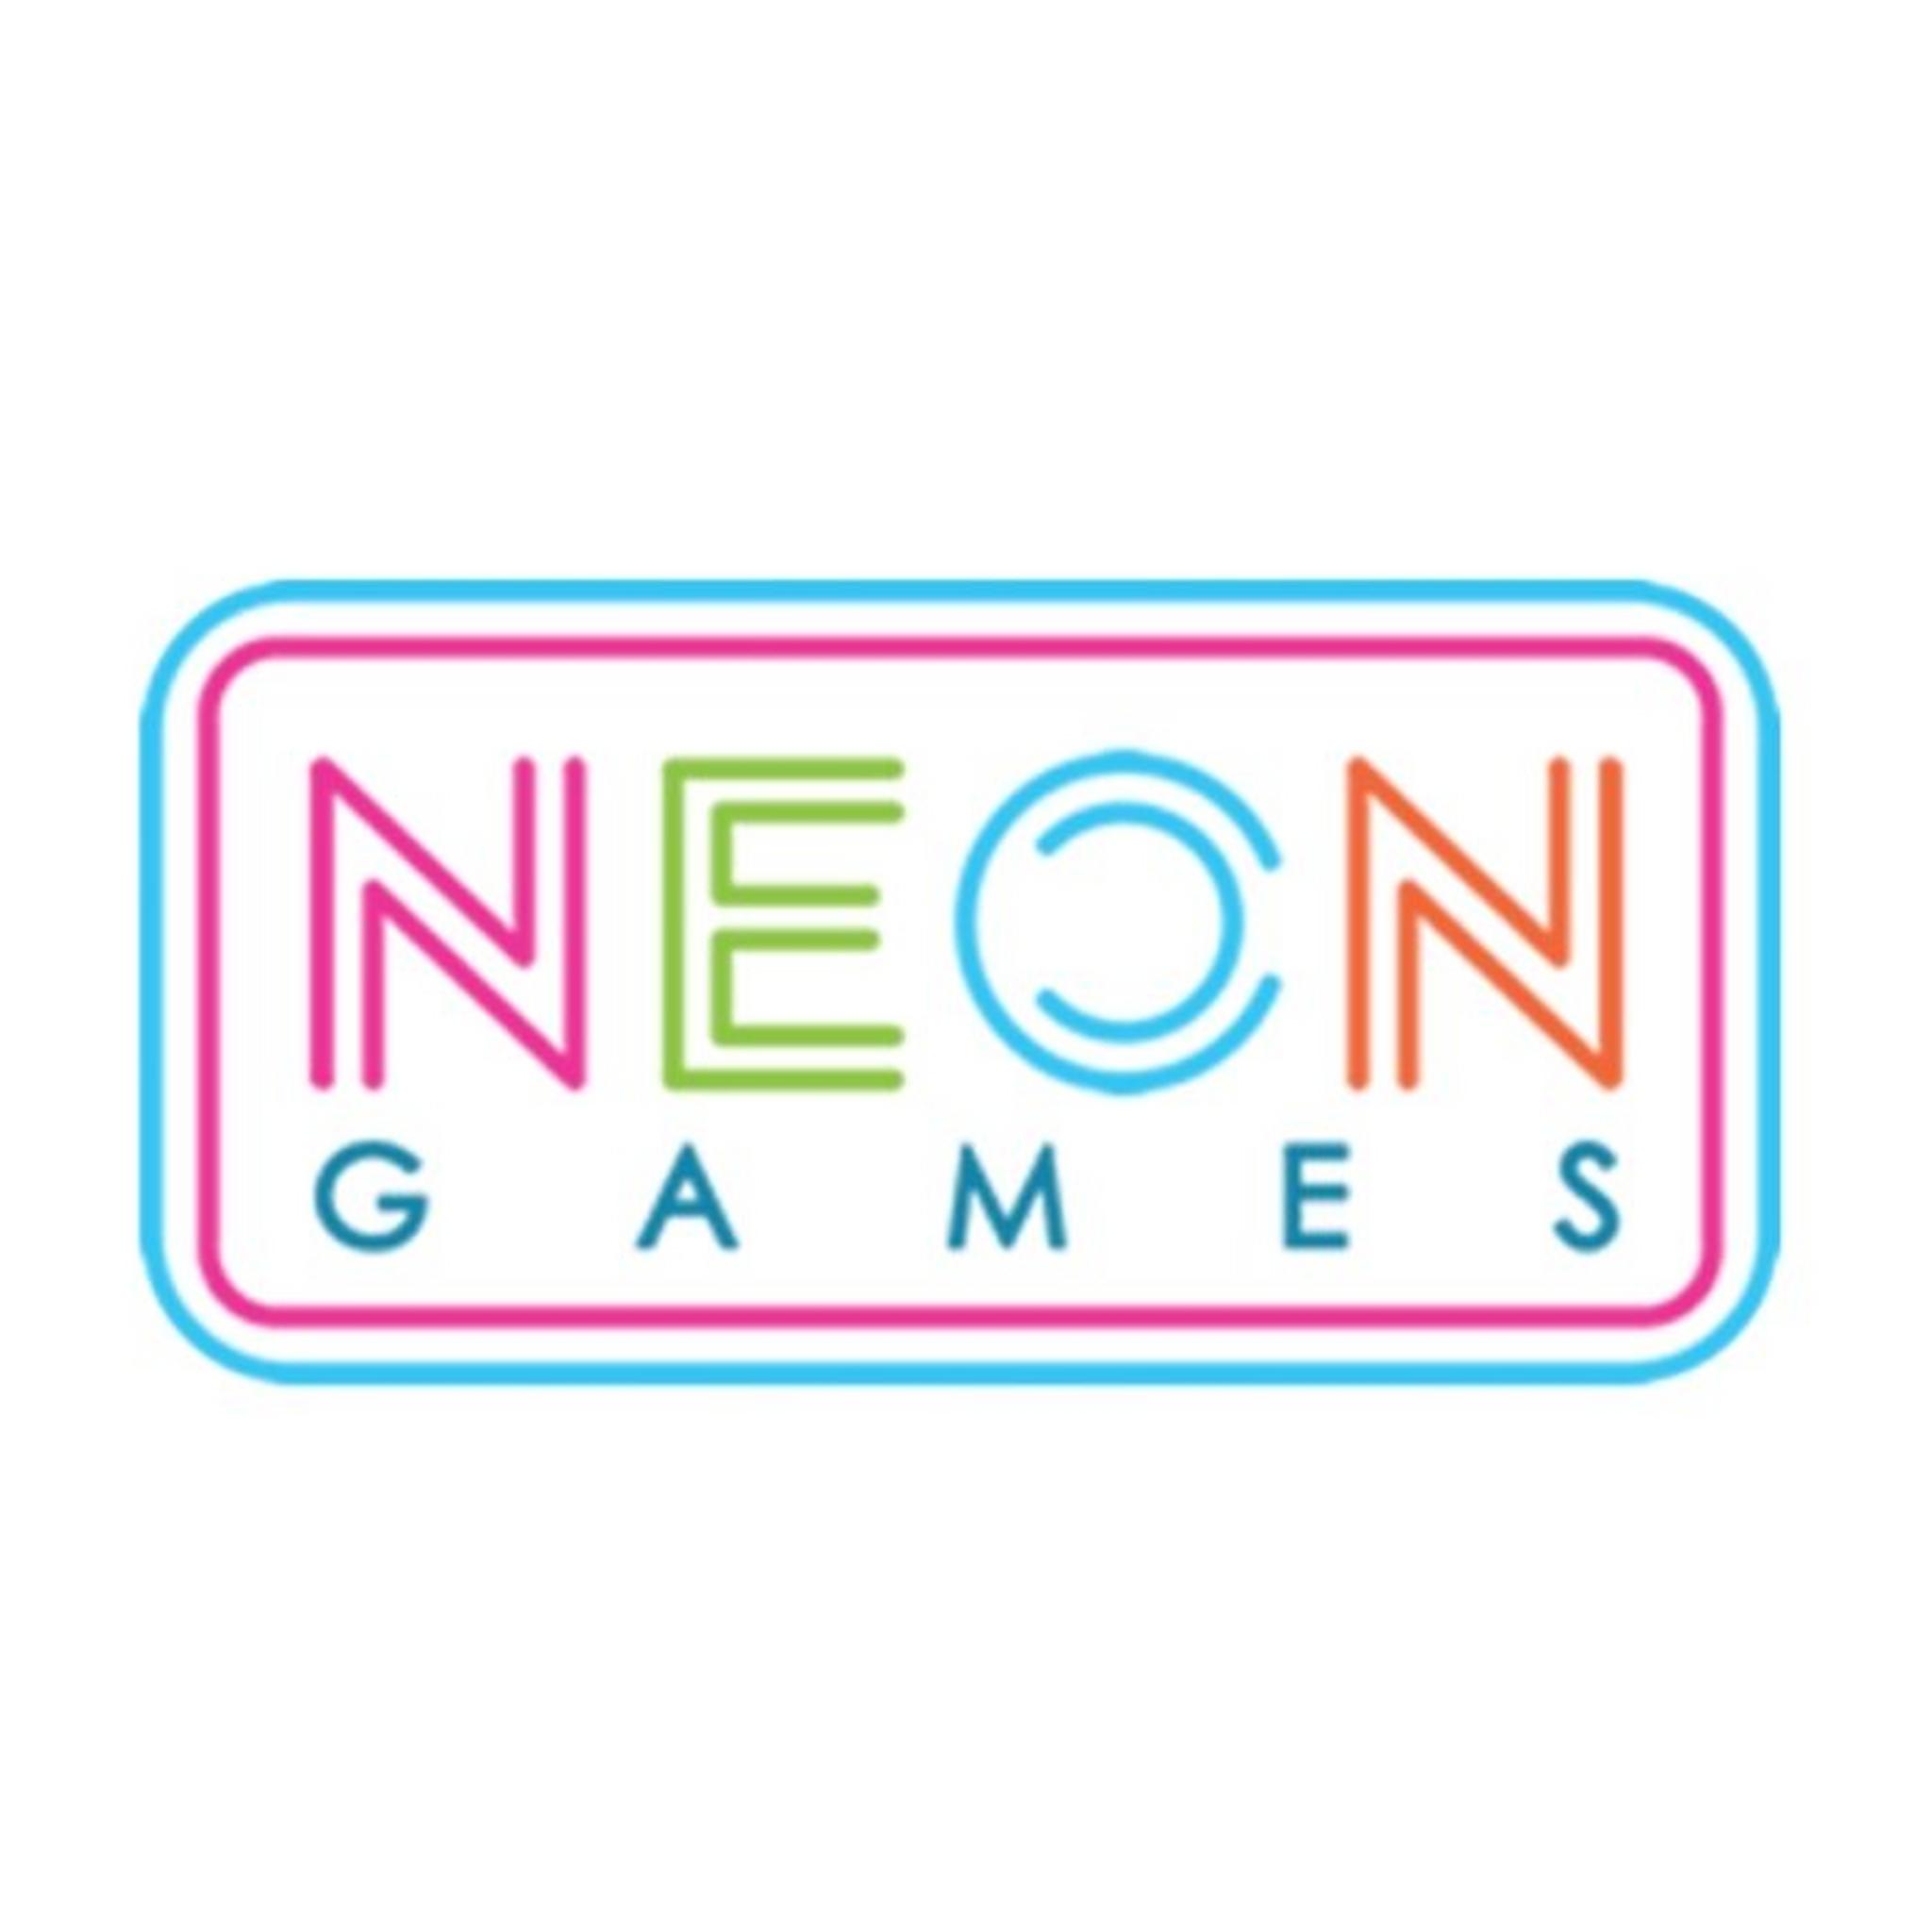 Neoon Games Card - 3700 points